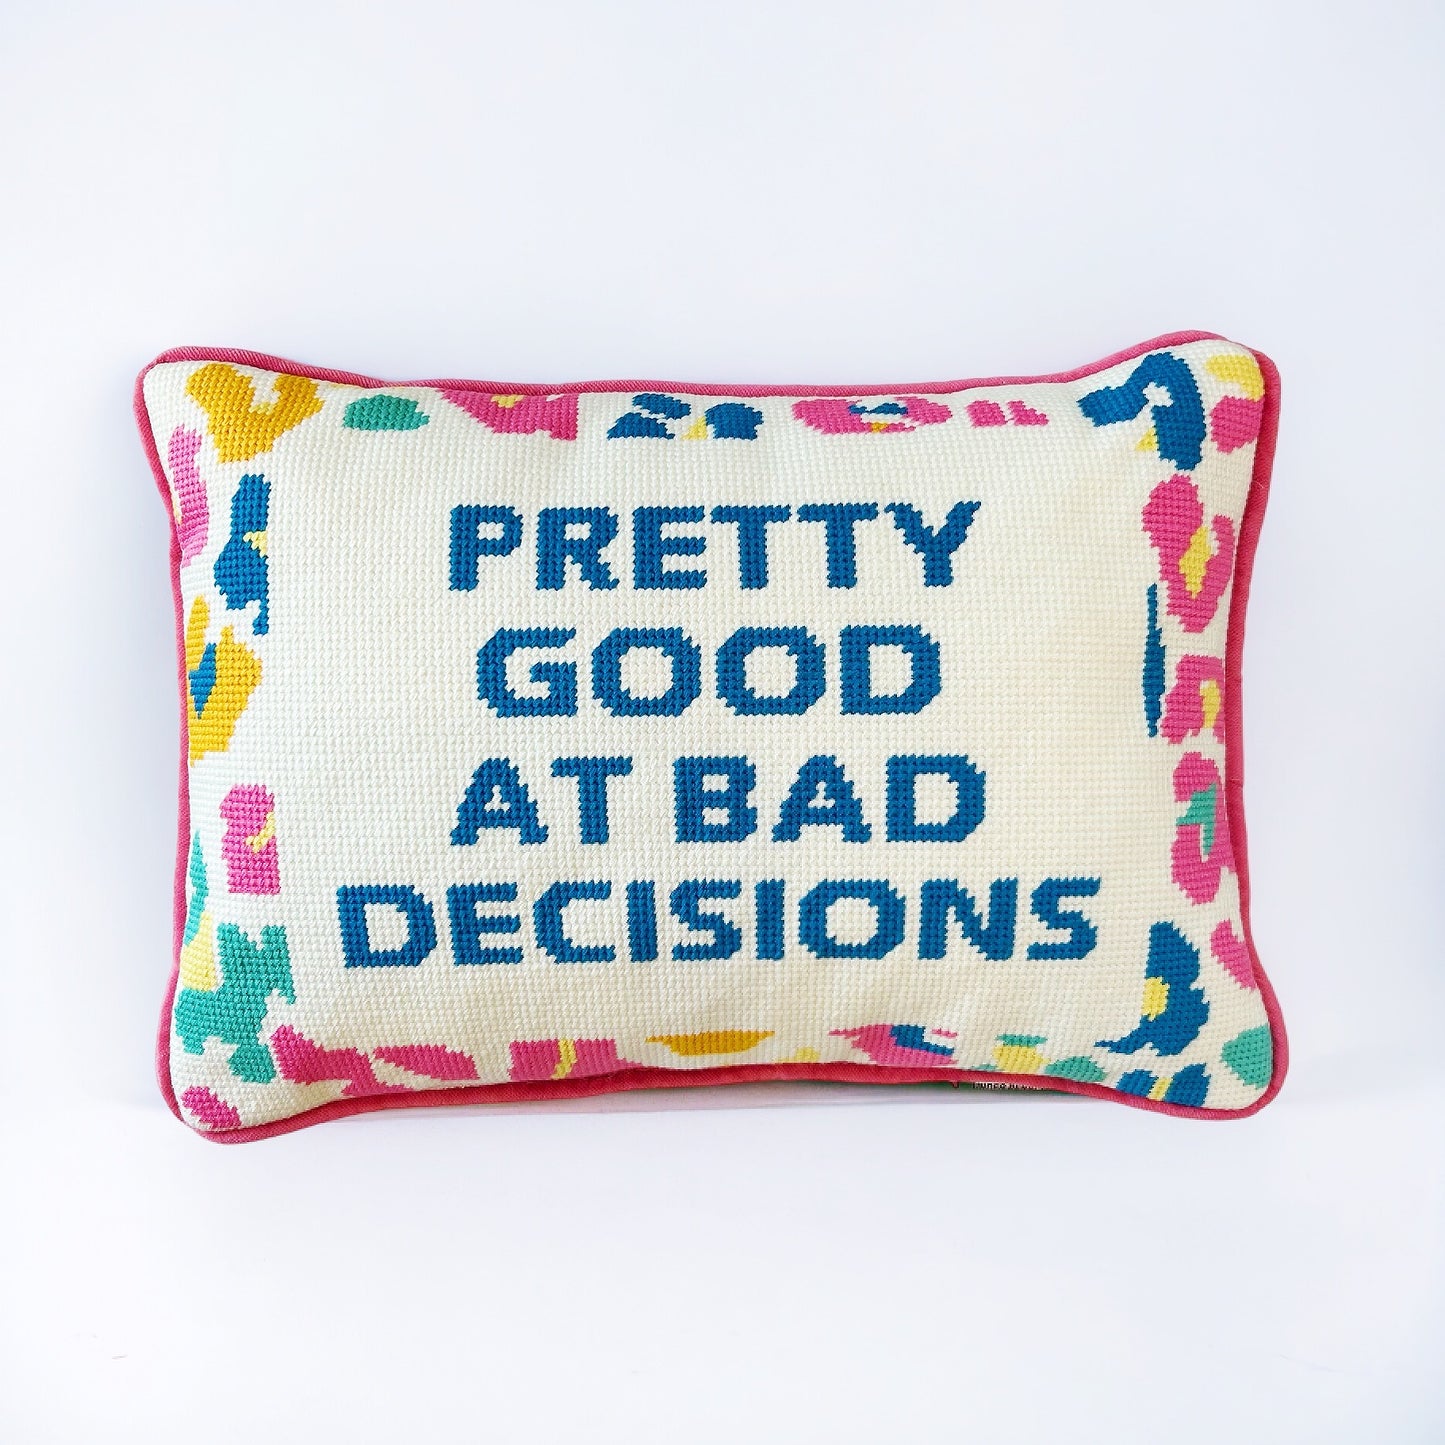 Hooked "Pretty Good at Bad Decisions" Throw Pillow